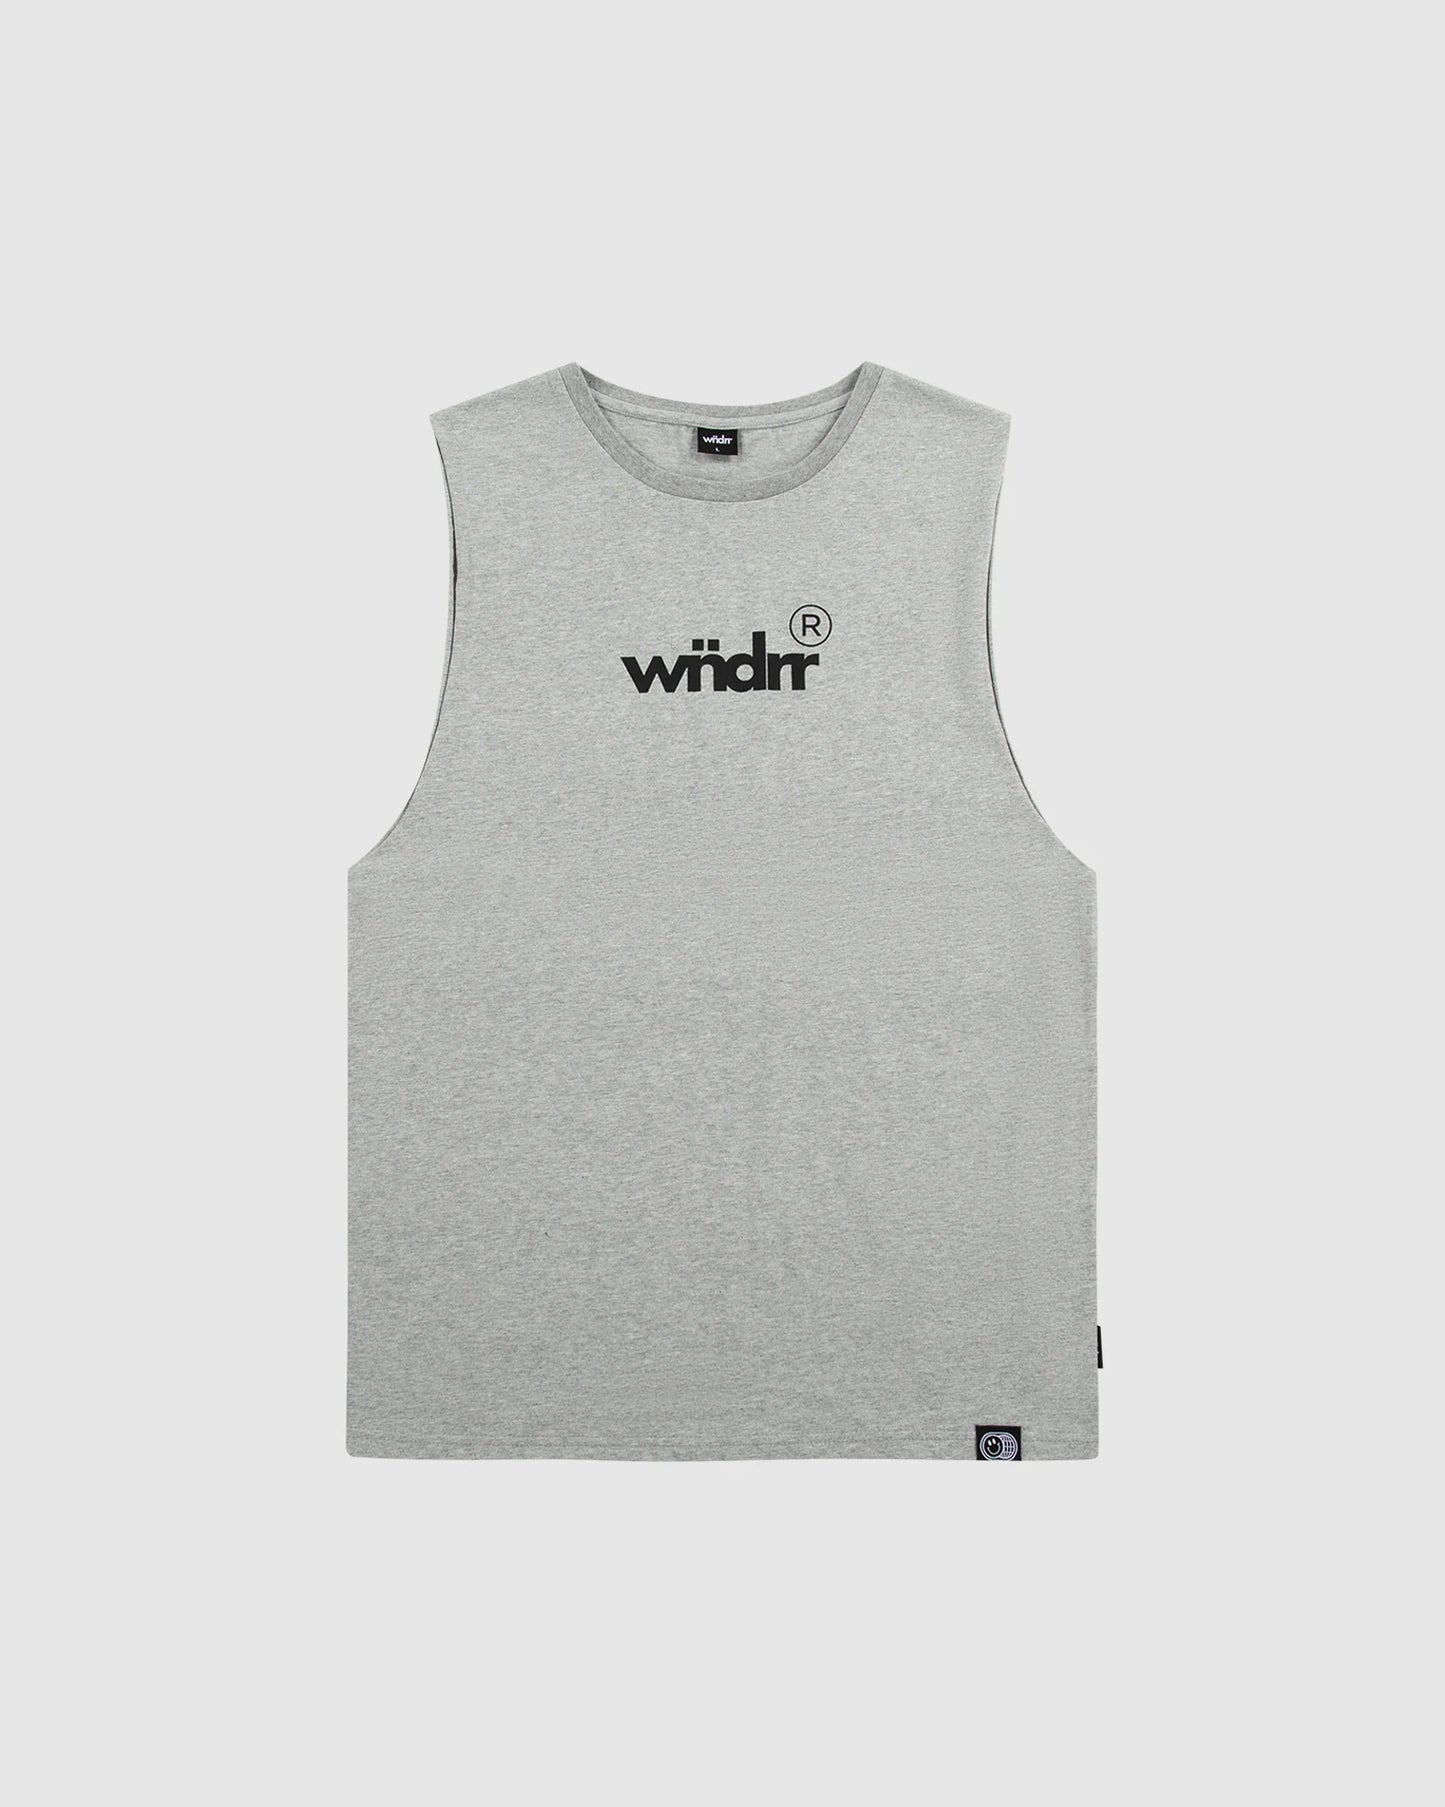 WNDRR Accent Muscle Mens Tank - Grey Marle